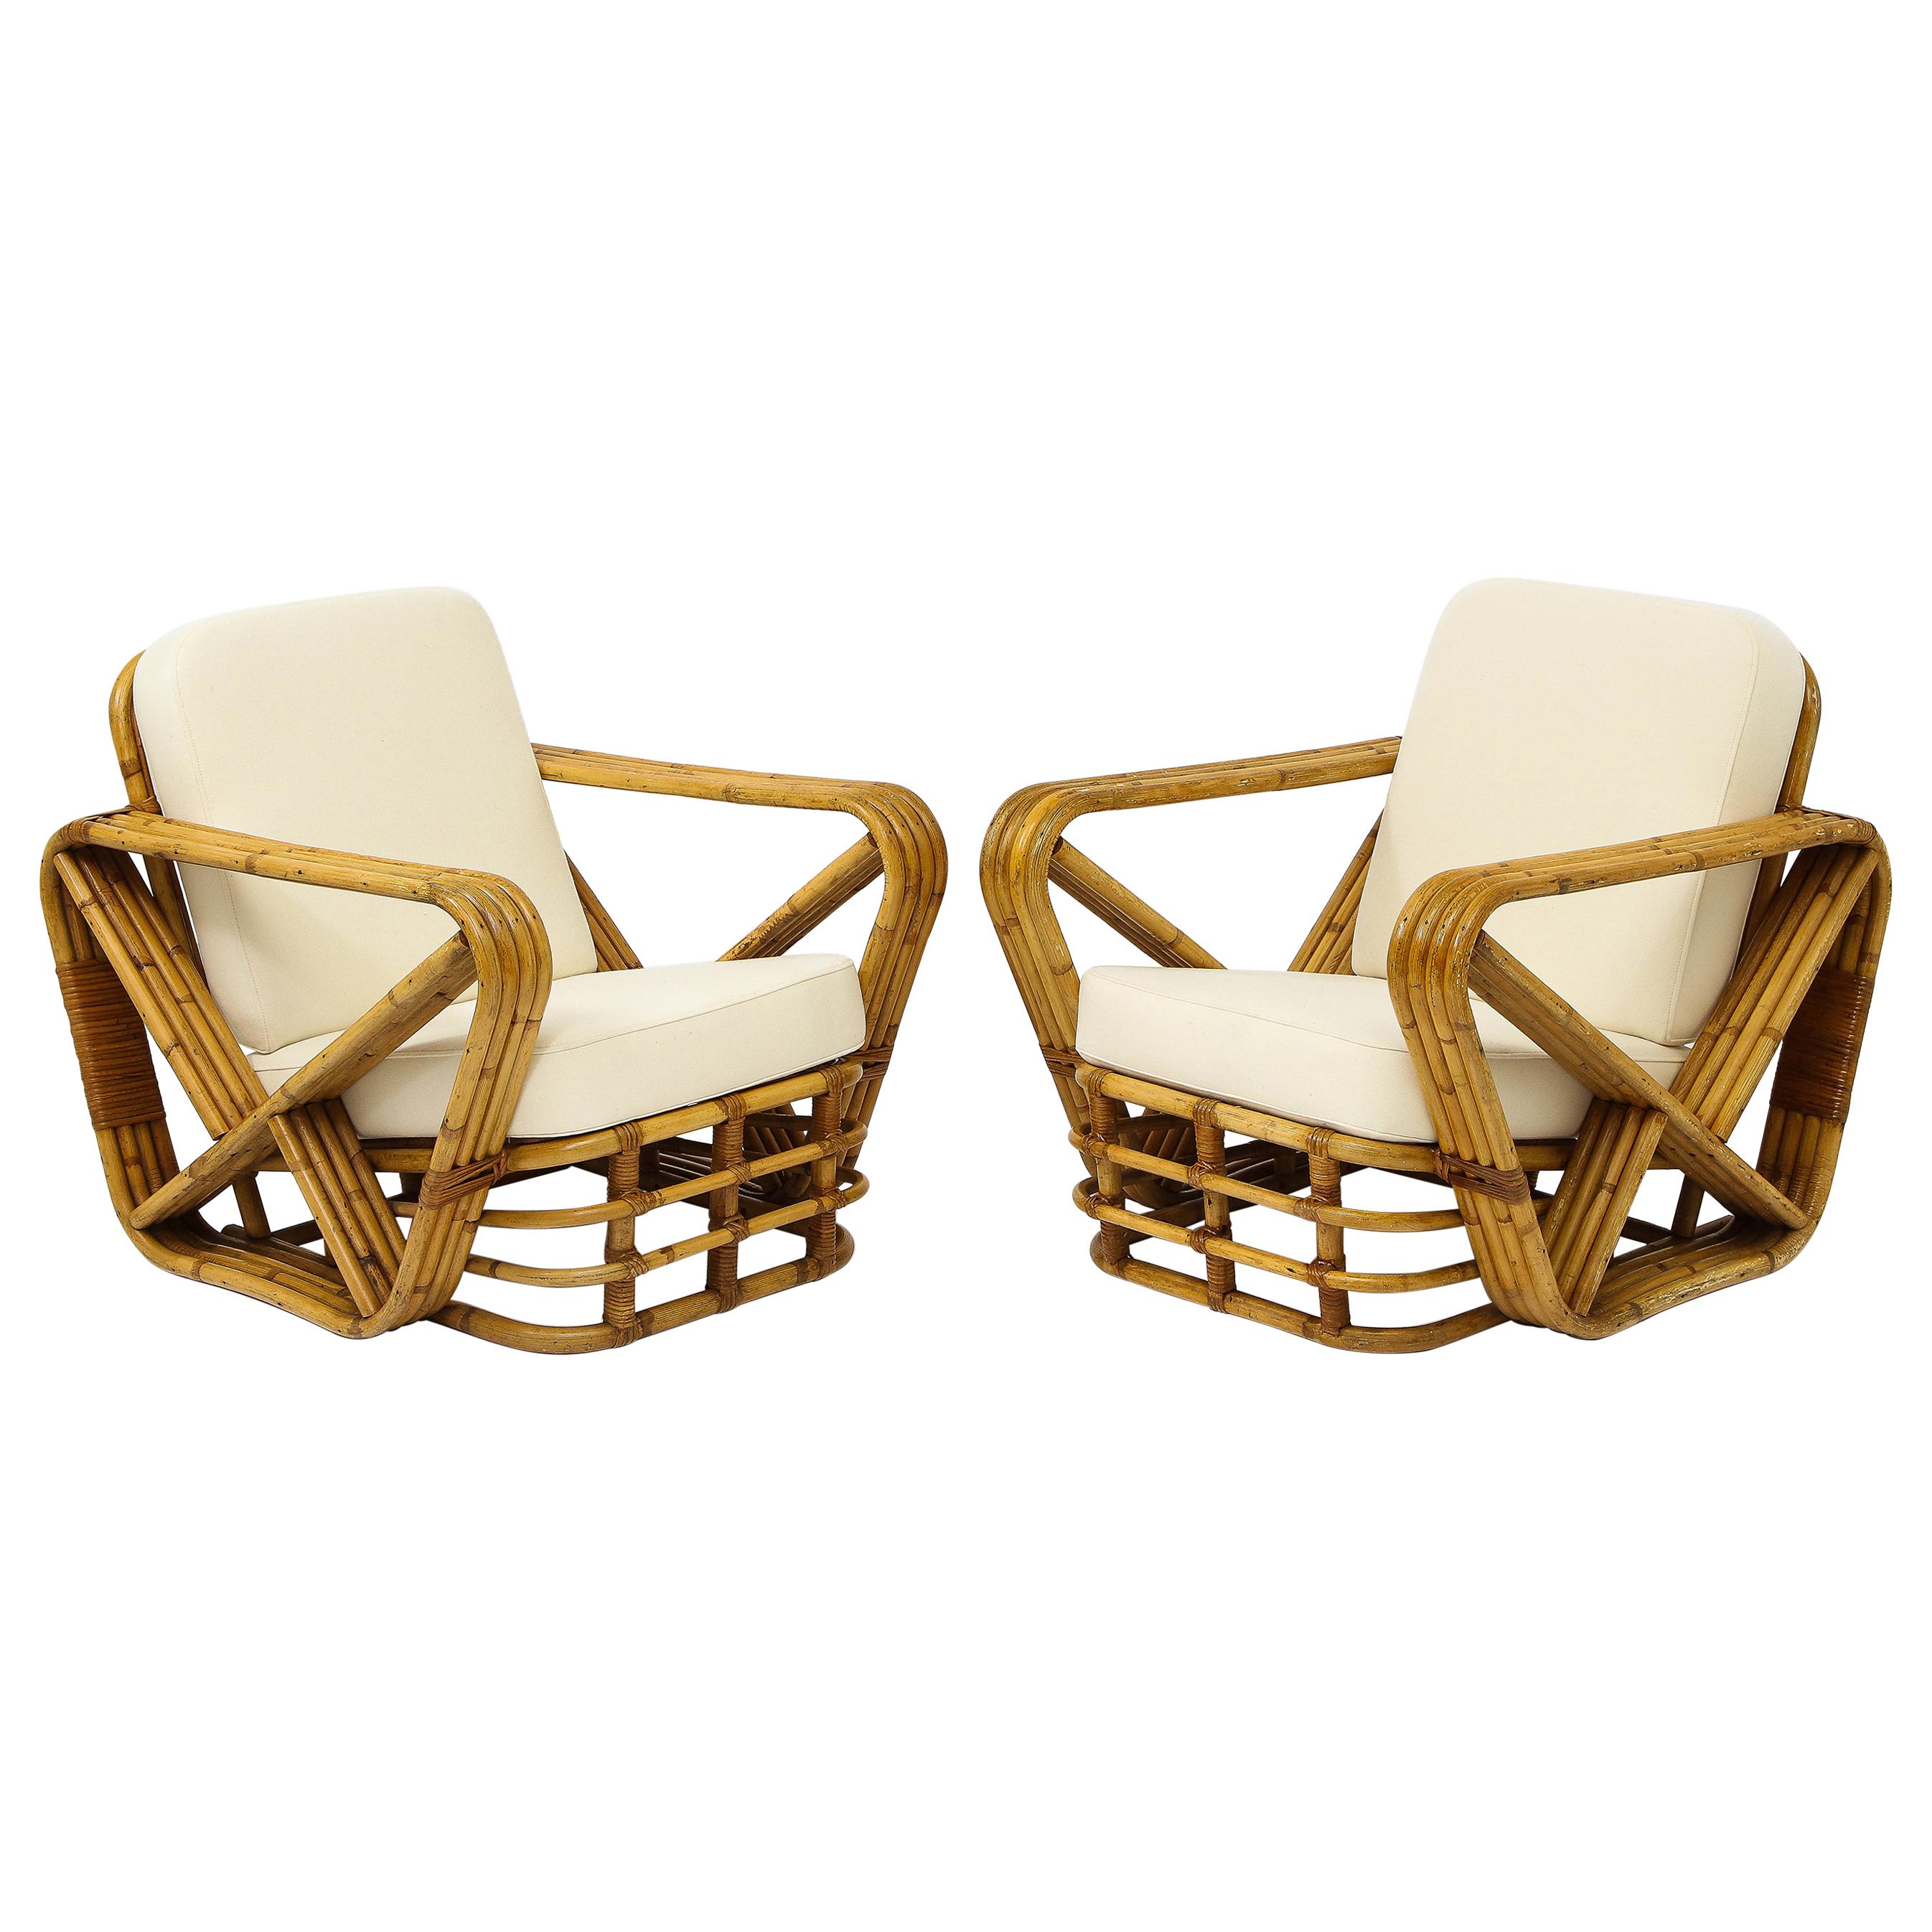 Pair of Paul Frankl Style Rattan Lounge Chairs, France, 1950s